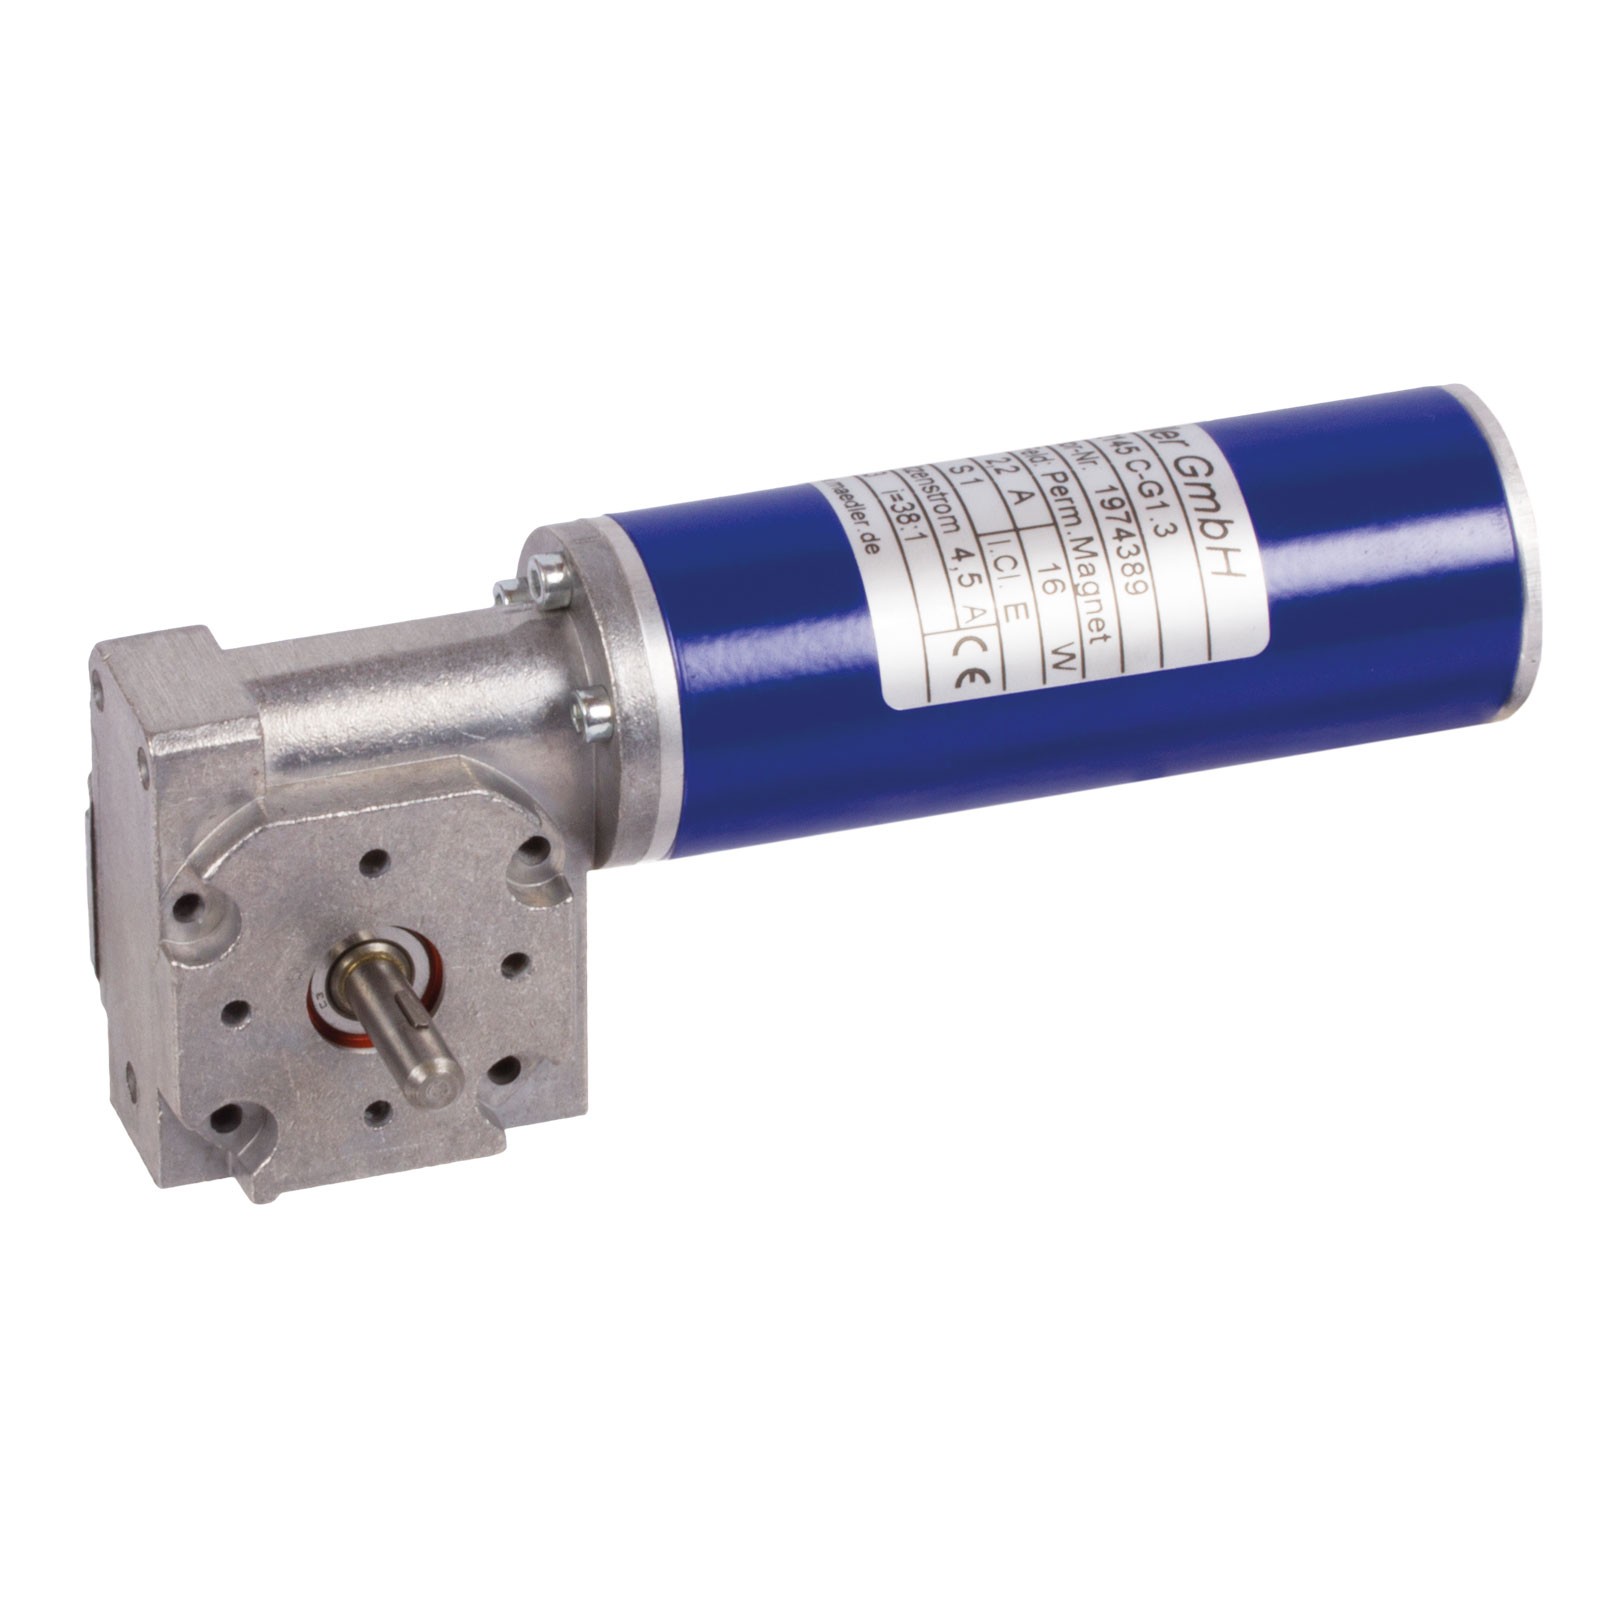 Small geared motor SE with DC motor 12V size 1 n2=200 rpm i=30:1 SKU:  43041412 - Maedler North America